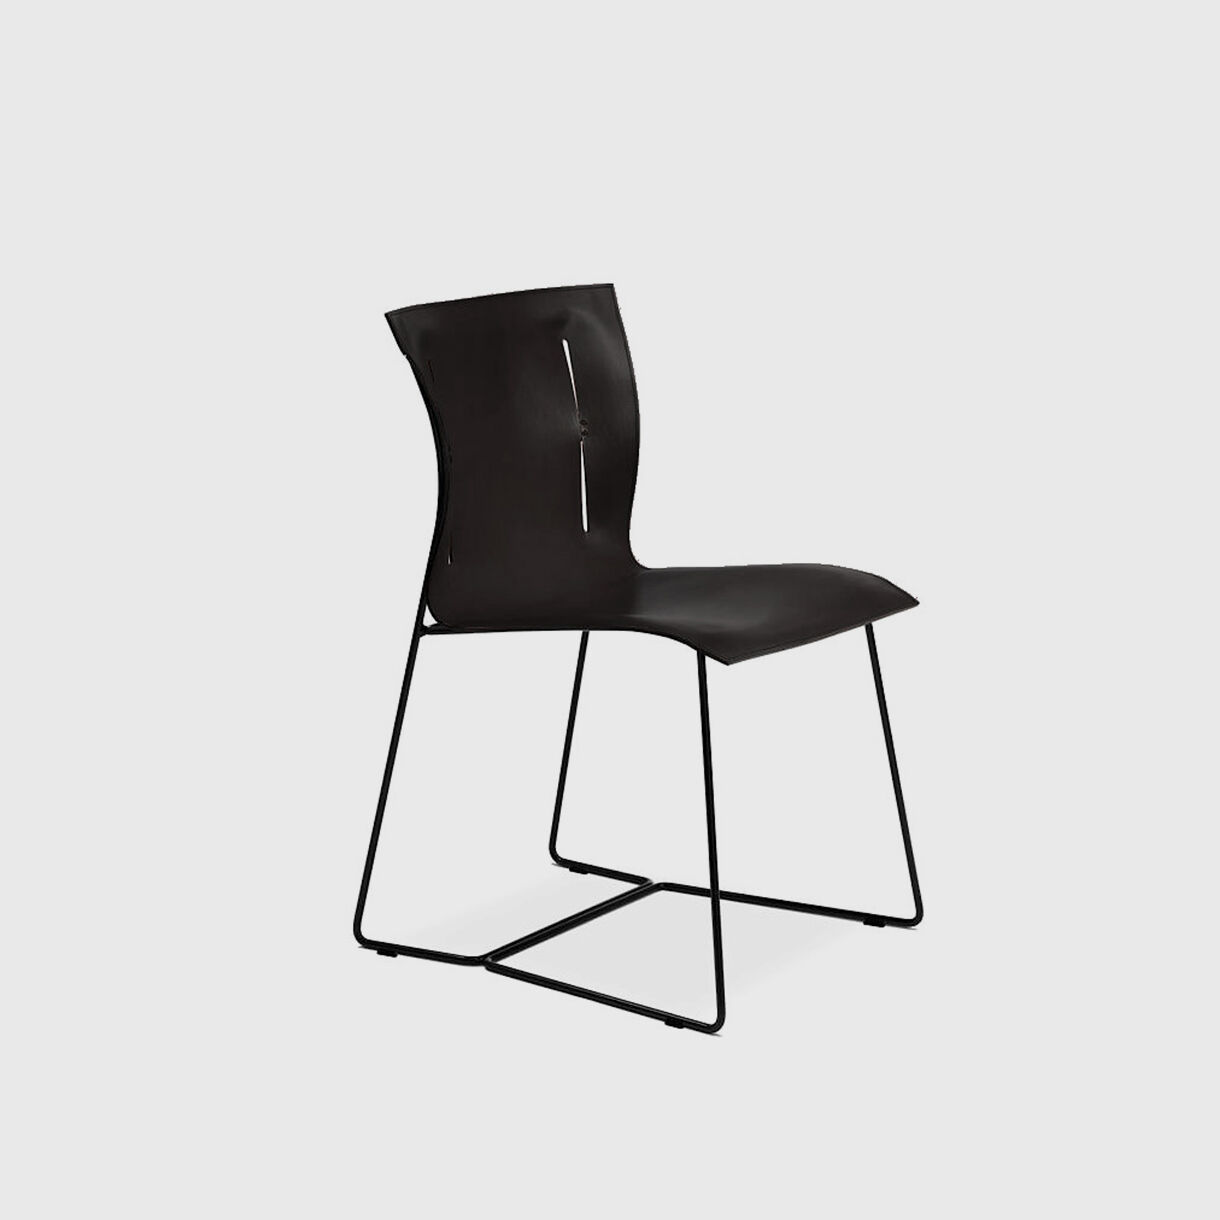 Cuoio Chair, Black Saddle Leather